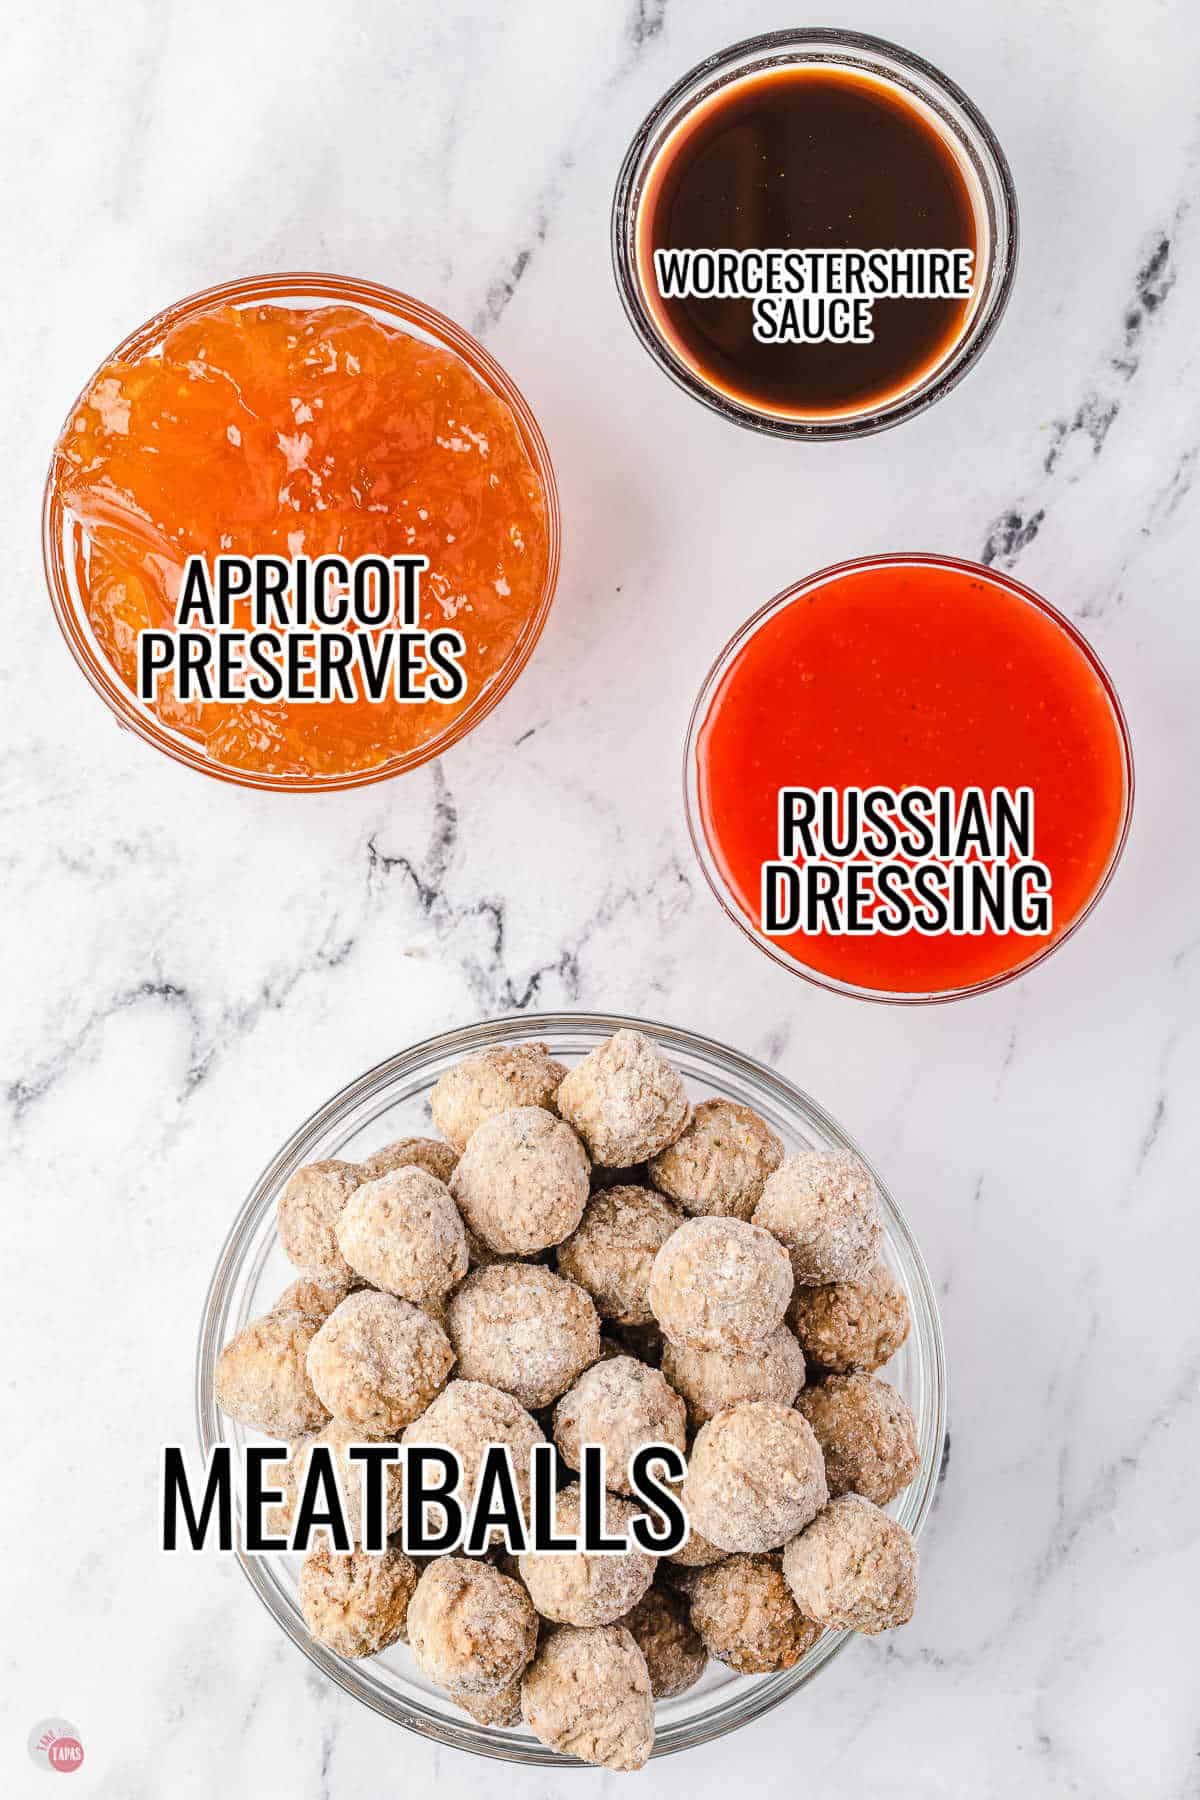 sweet and sour meatballs ingredients